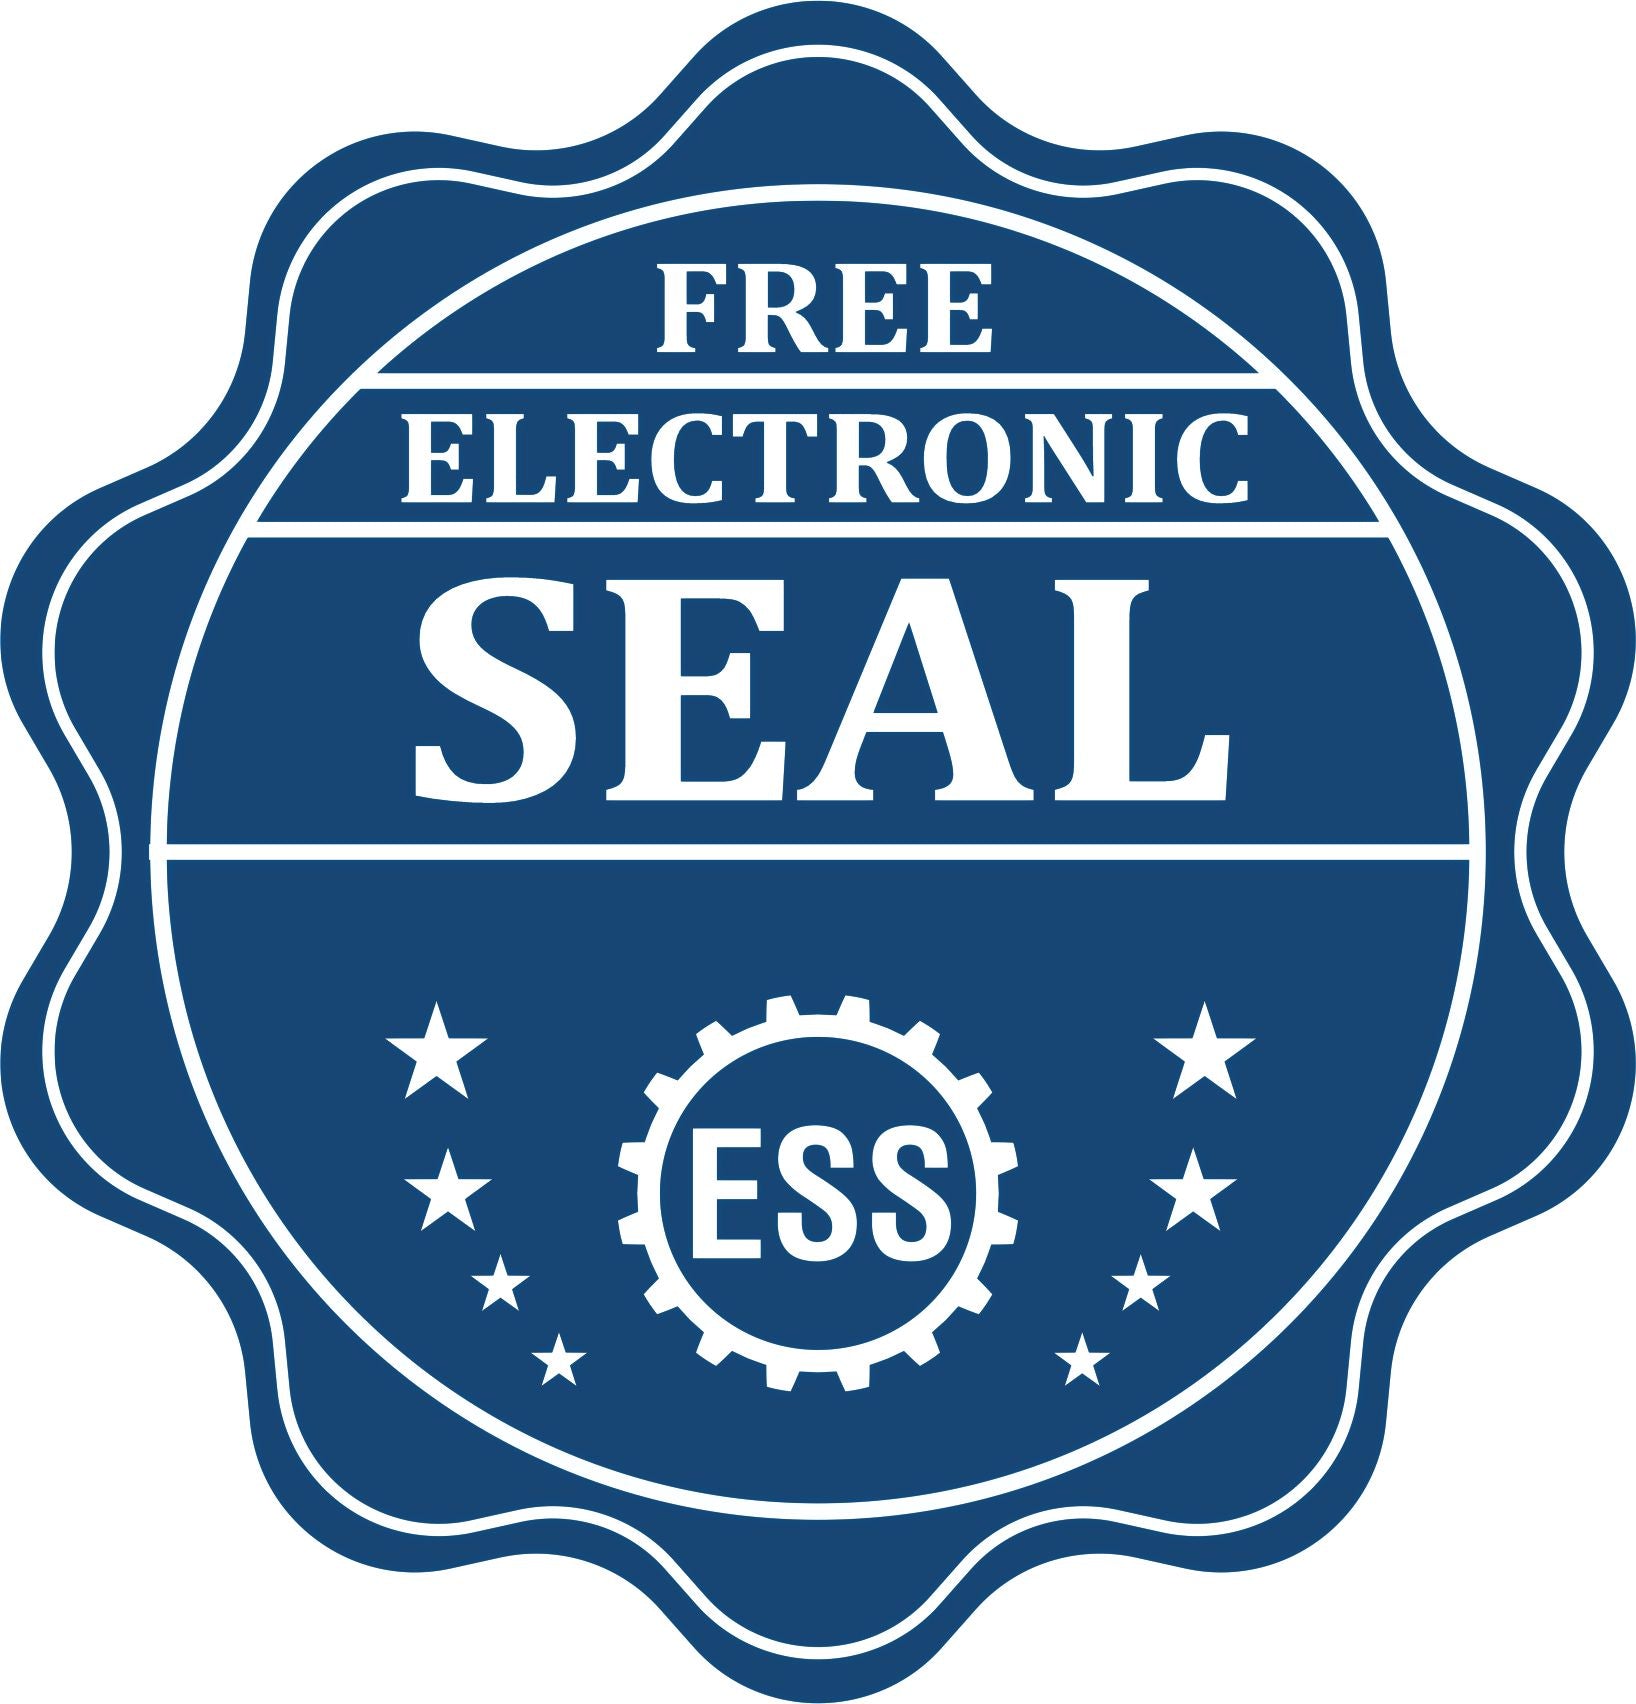 A badge showing a free electronic seal for the Soft South Dakota Professional Geologist Seal with stars and the ESS gear on the emblem.